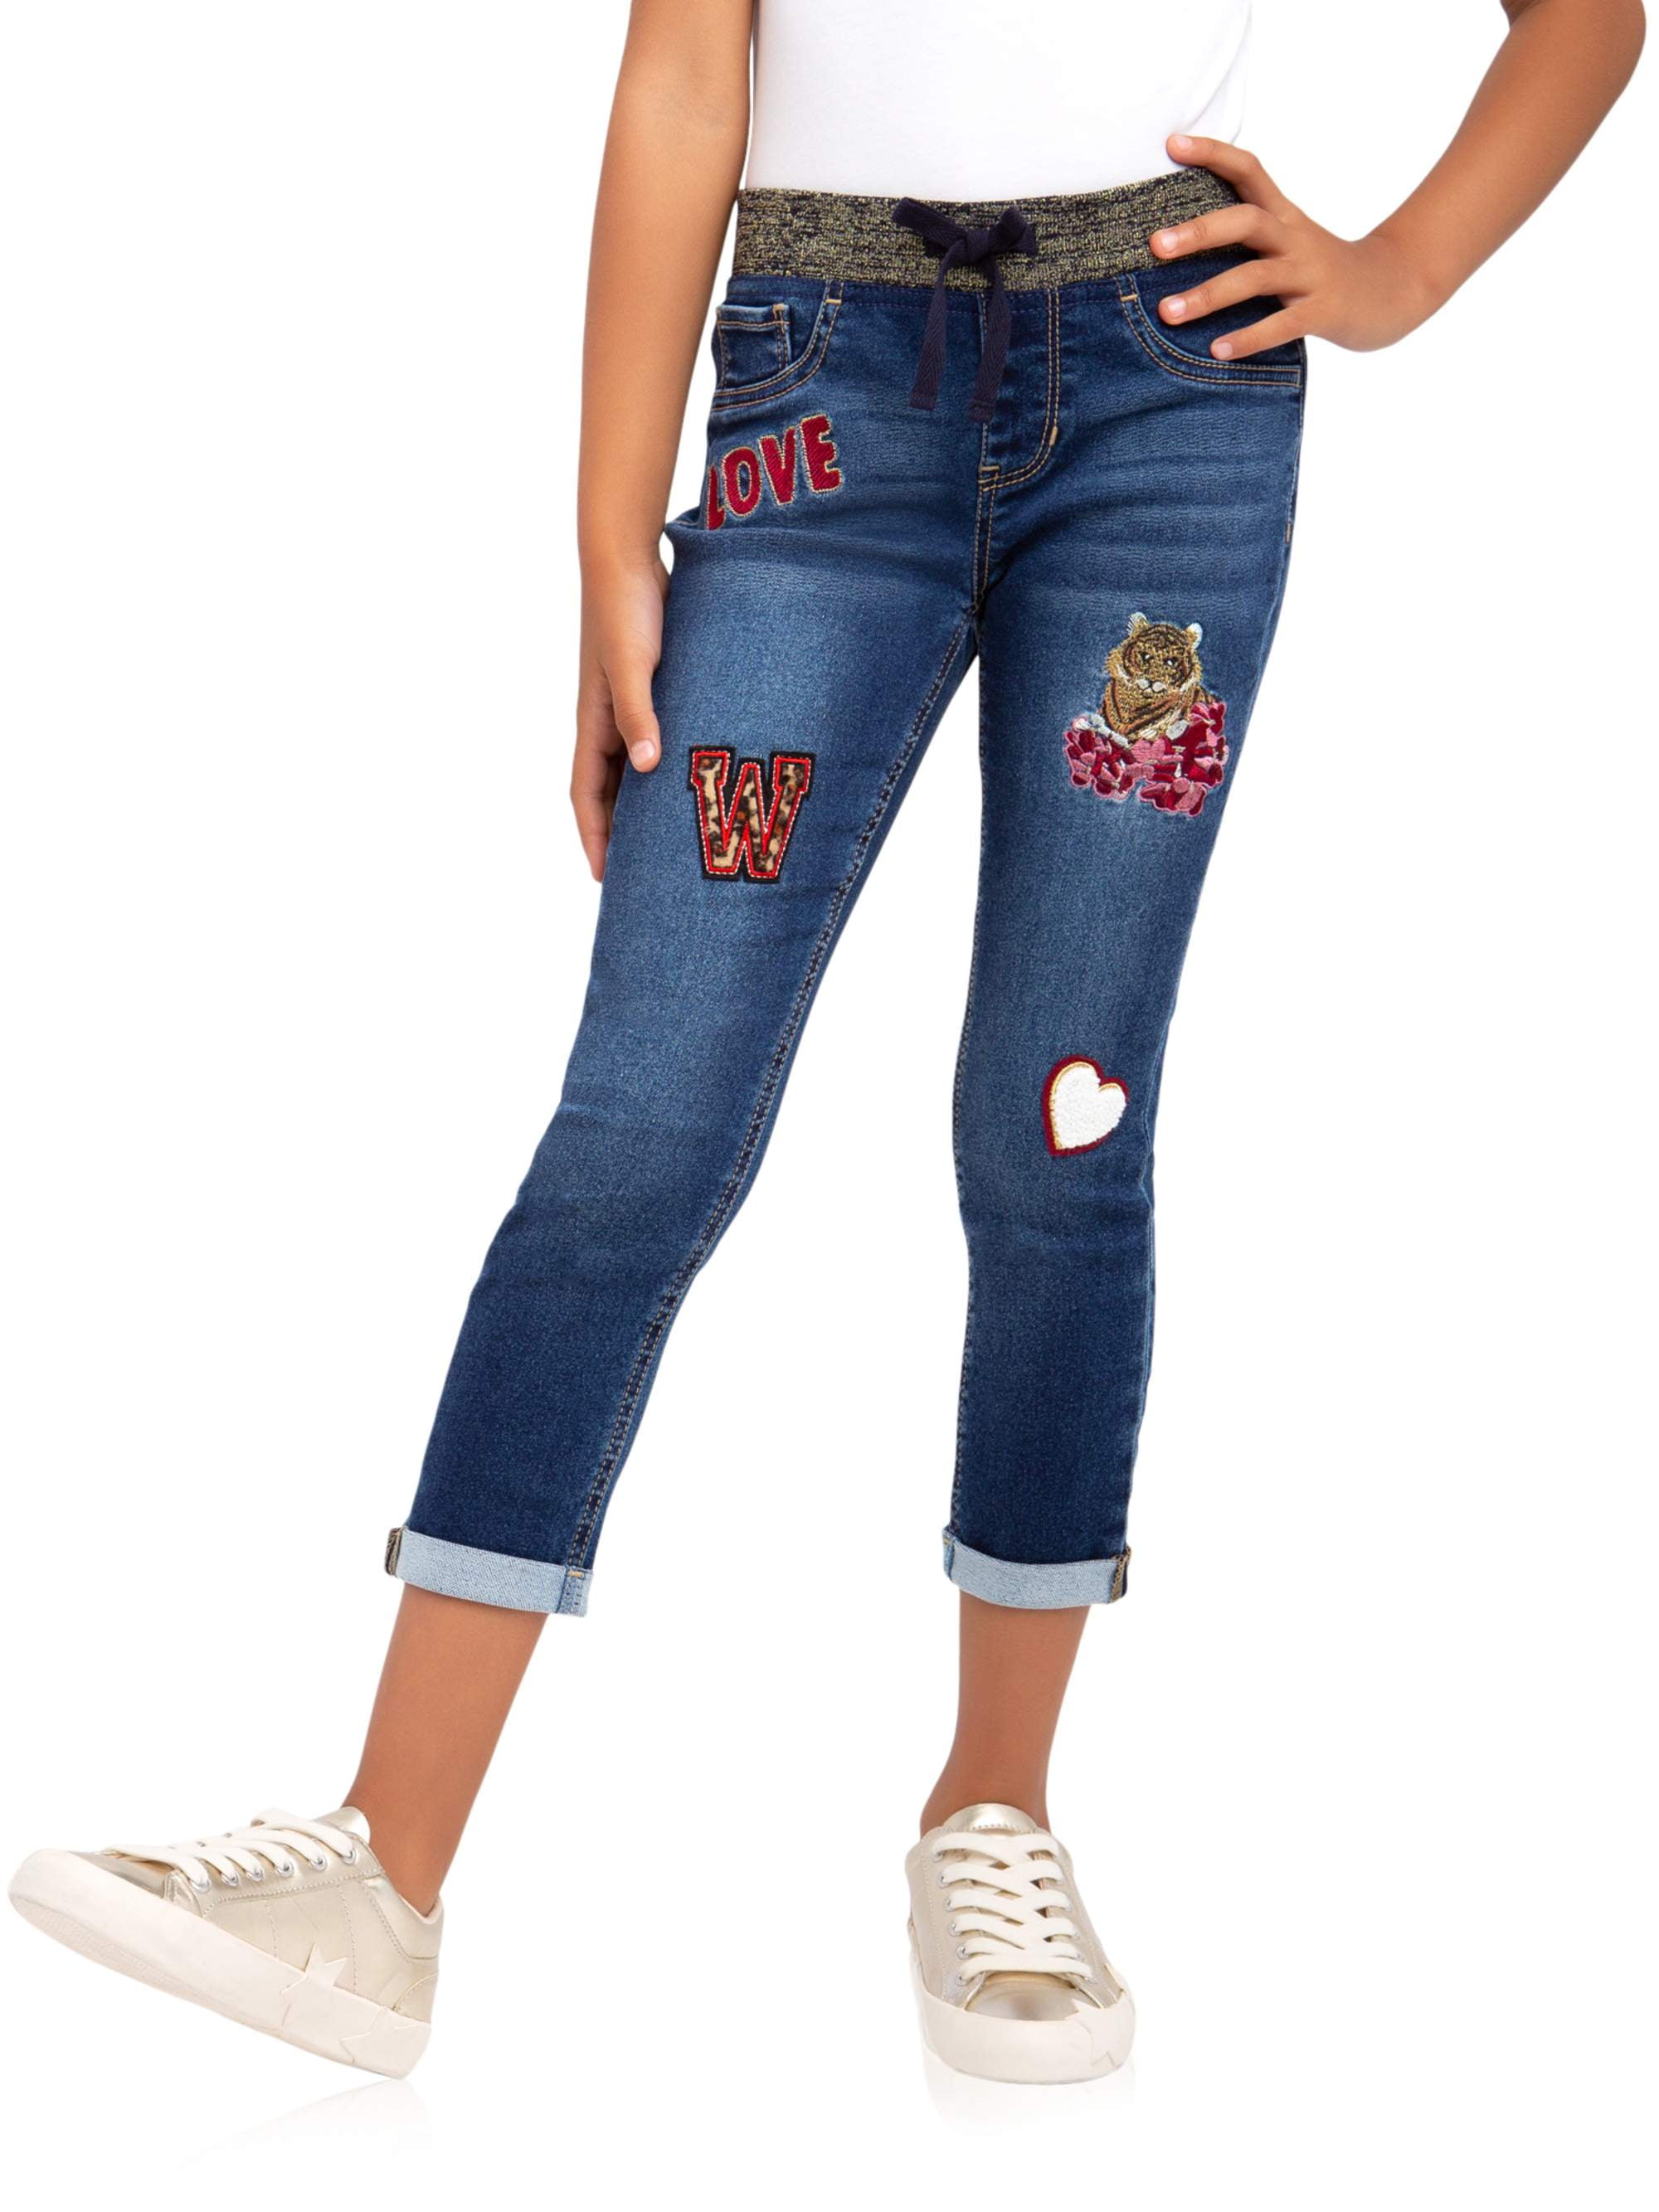 kafri jeans for girl online sales,Up To > OFF-66 %